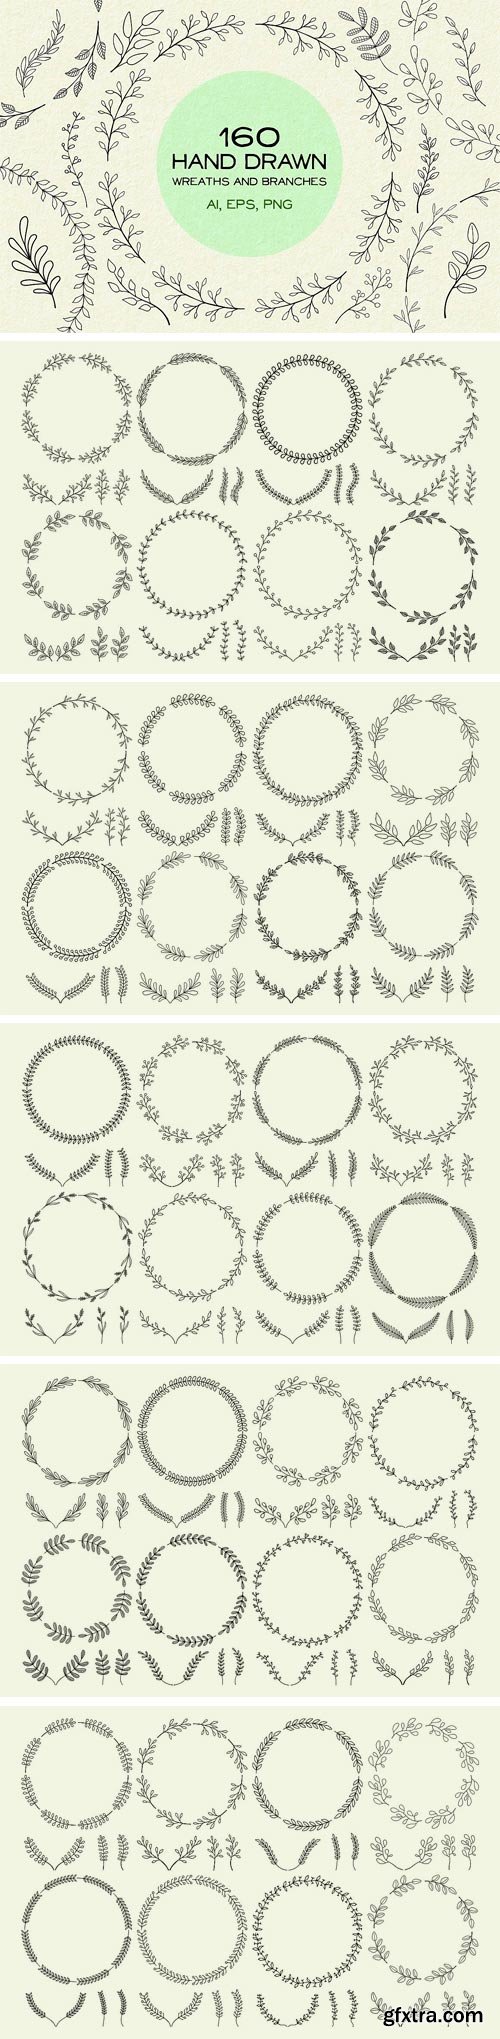 CM 1436271 - 160 Hand Drawn Wreaths and Branches